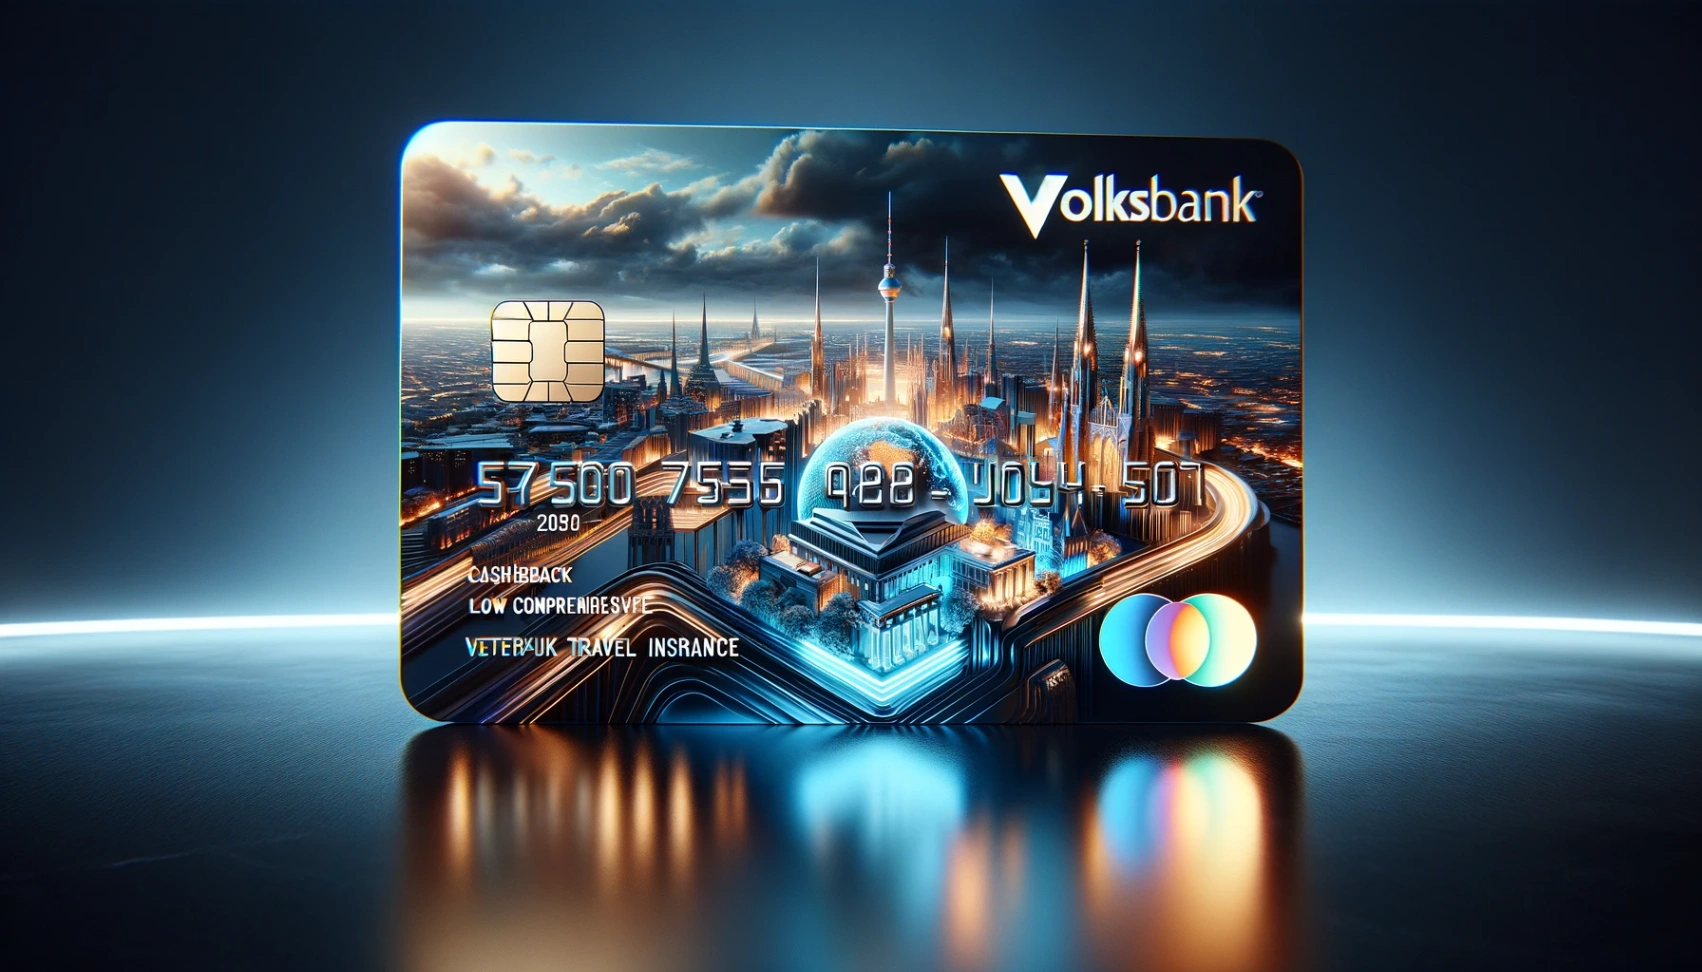 Volksbank Credit Card - Learn How To Apply Today